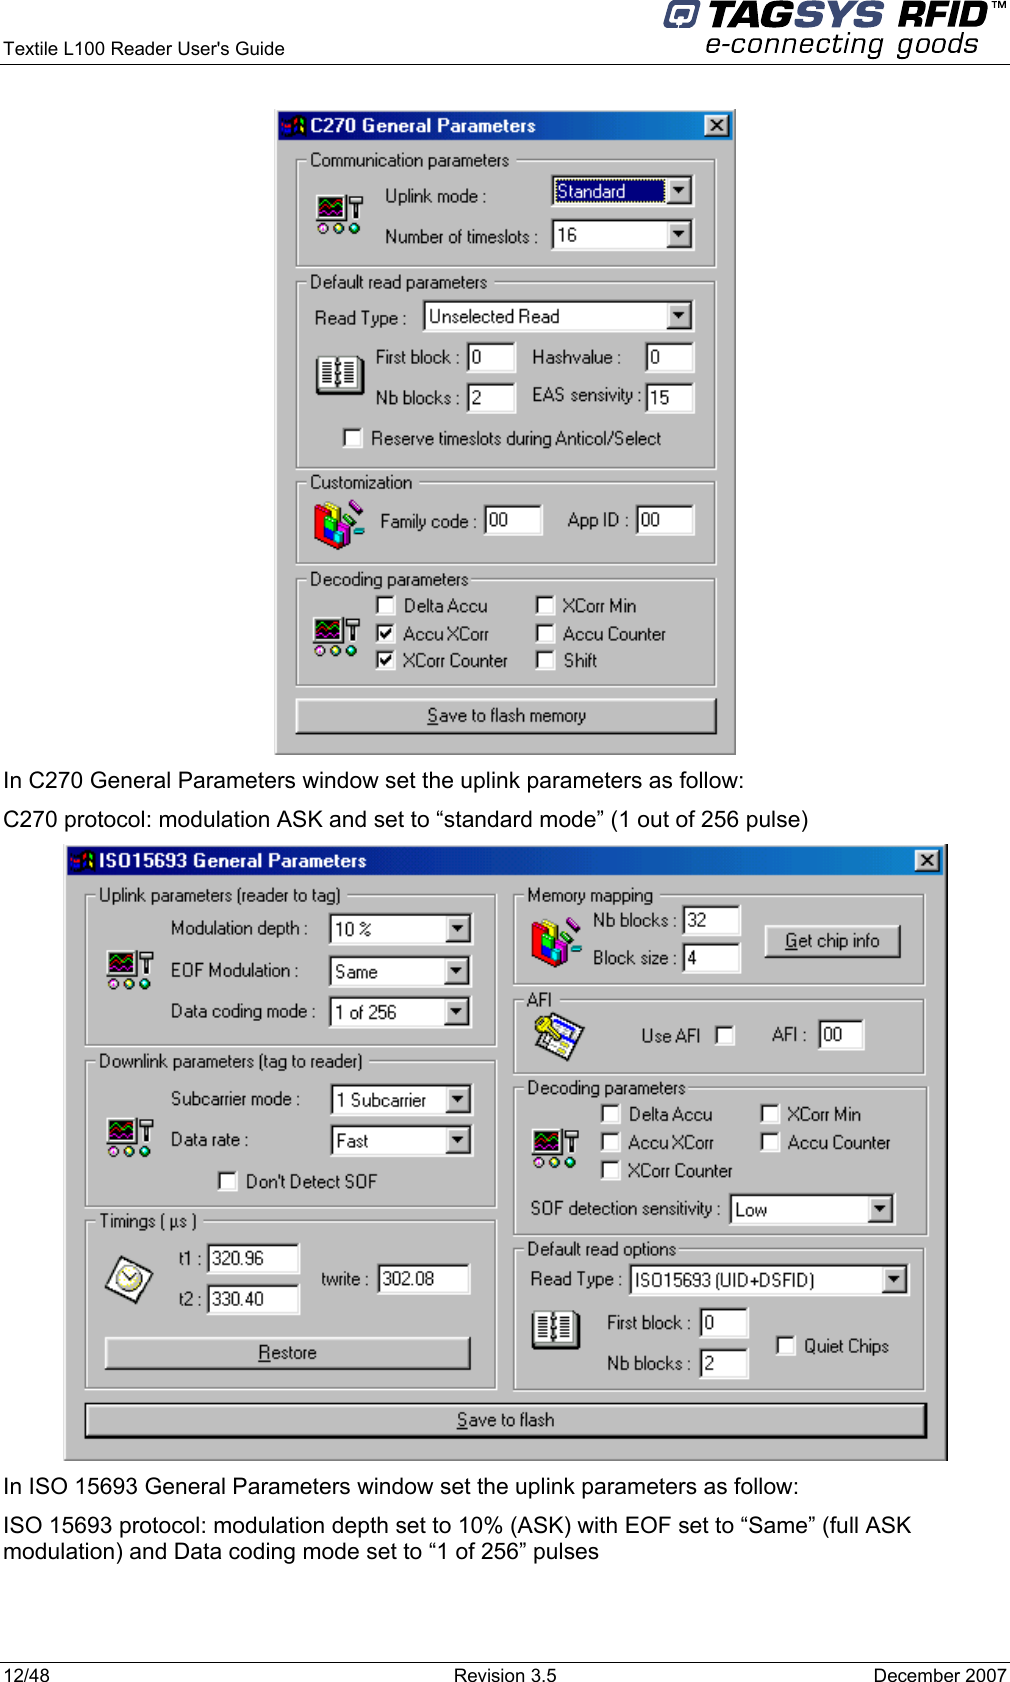  Textile L100 Reader User&apos;s Guide     12/48  Revision 3.5  December 2007  In C270 General Parameters window set the uplink parameters as follow: C270 protocol: modulation ASK and set to “standard mode” (1 out of 256 pulse)  In ISO 15693 General Parameters window set the uplink parameters as follow: ISO 15693 protocol: modulation depth set to 10% (ASK) with EOF set to “Same” (full ASK modulation) and Data coding mode set to “1 of 256” pulses 